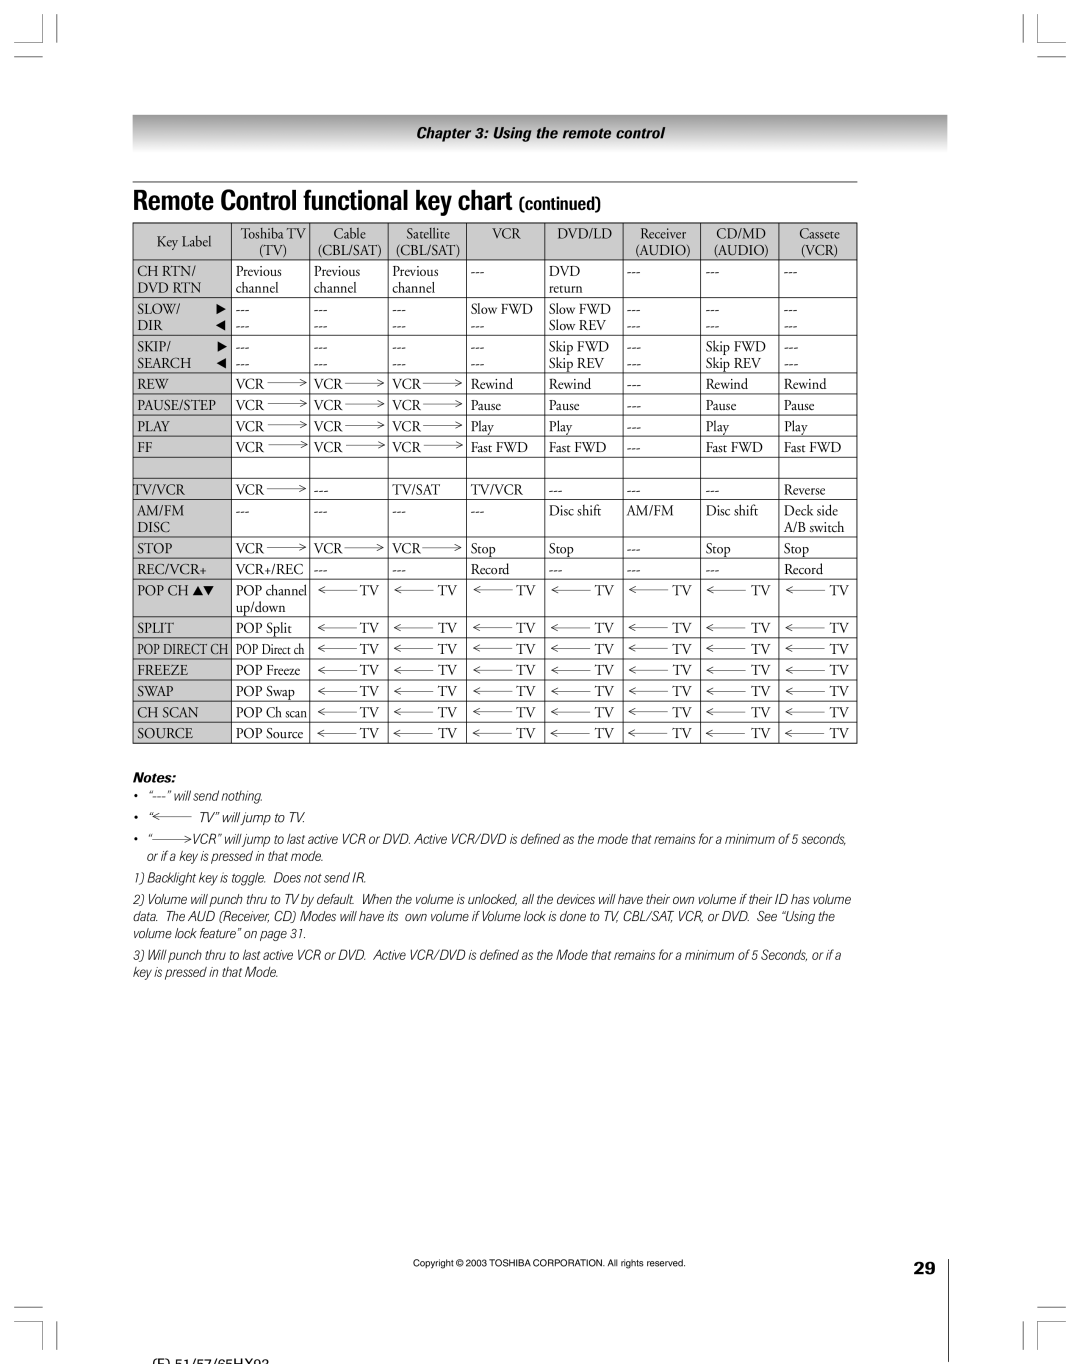 Toshiba 51HX93 owner manual Remote Control functional key chart continued, Using the remote control 